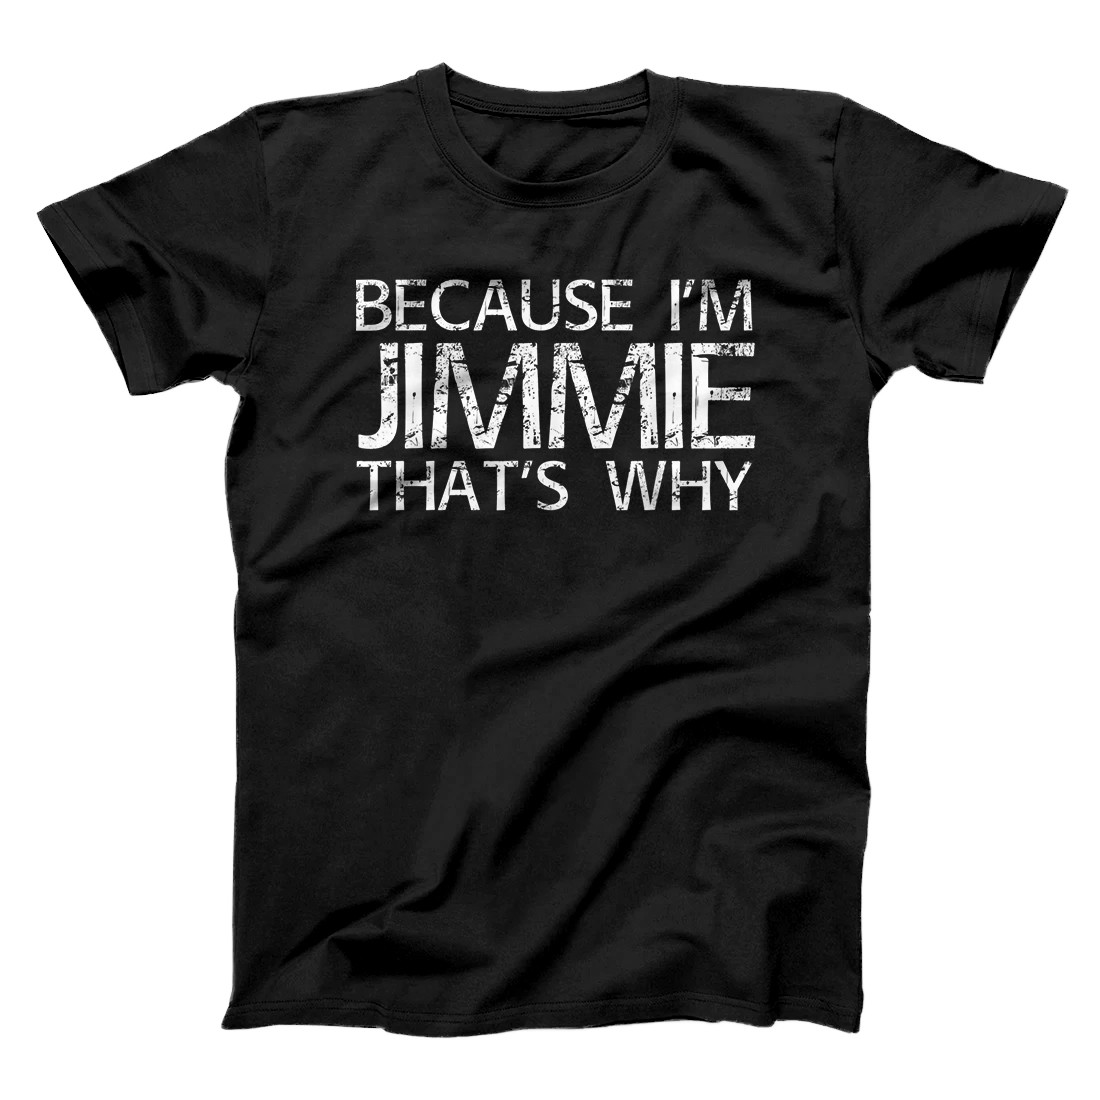 Personalized BECAUSE I'M JIMMIE THAT'S WHY Fun Funny Gift Idea T-Shirt